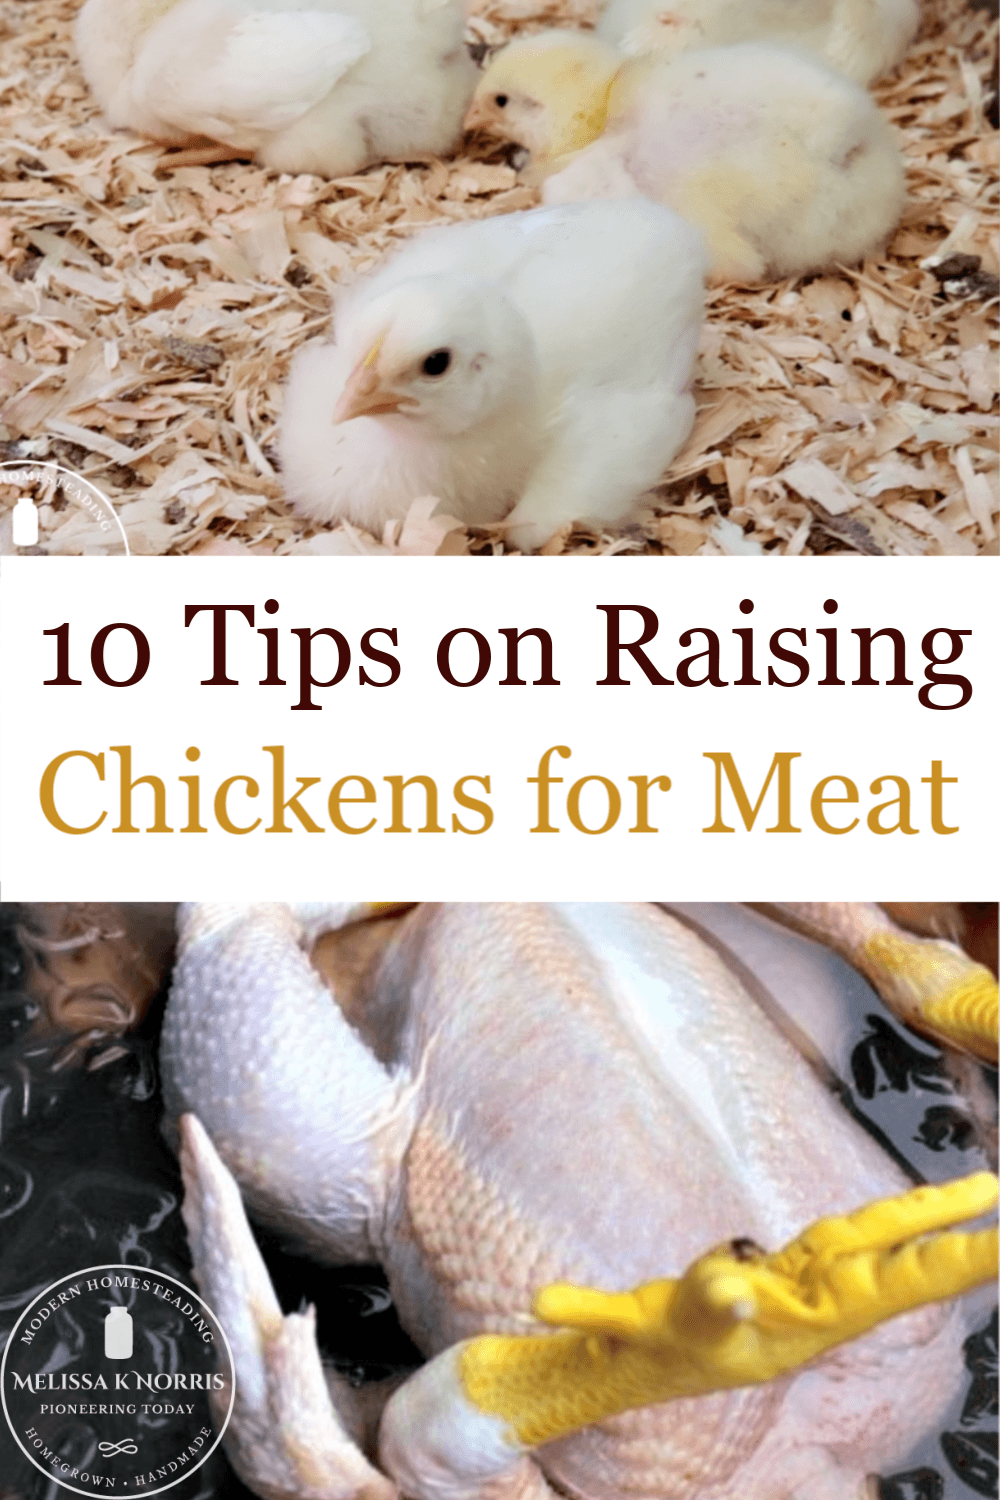 10 Tips On Raising Chickens For Meat